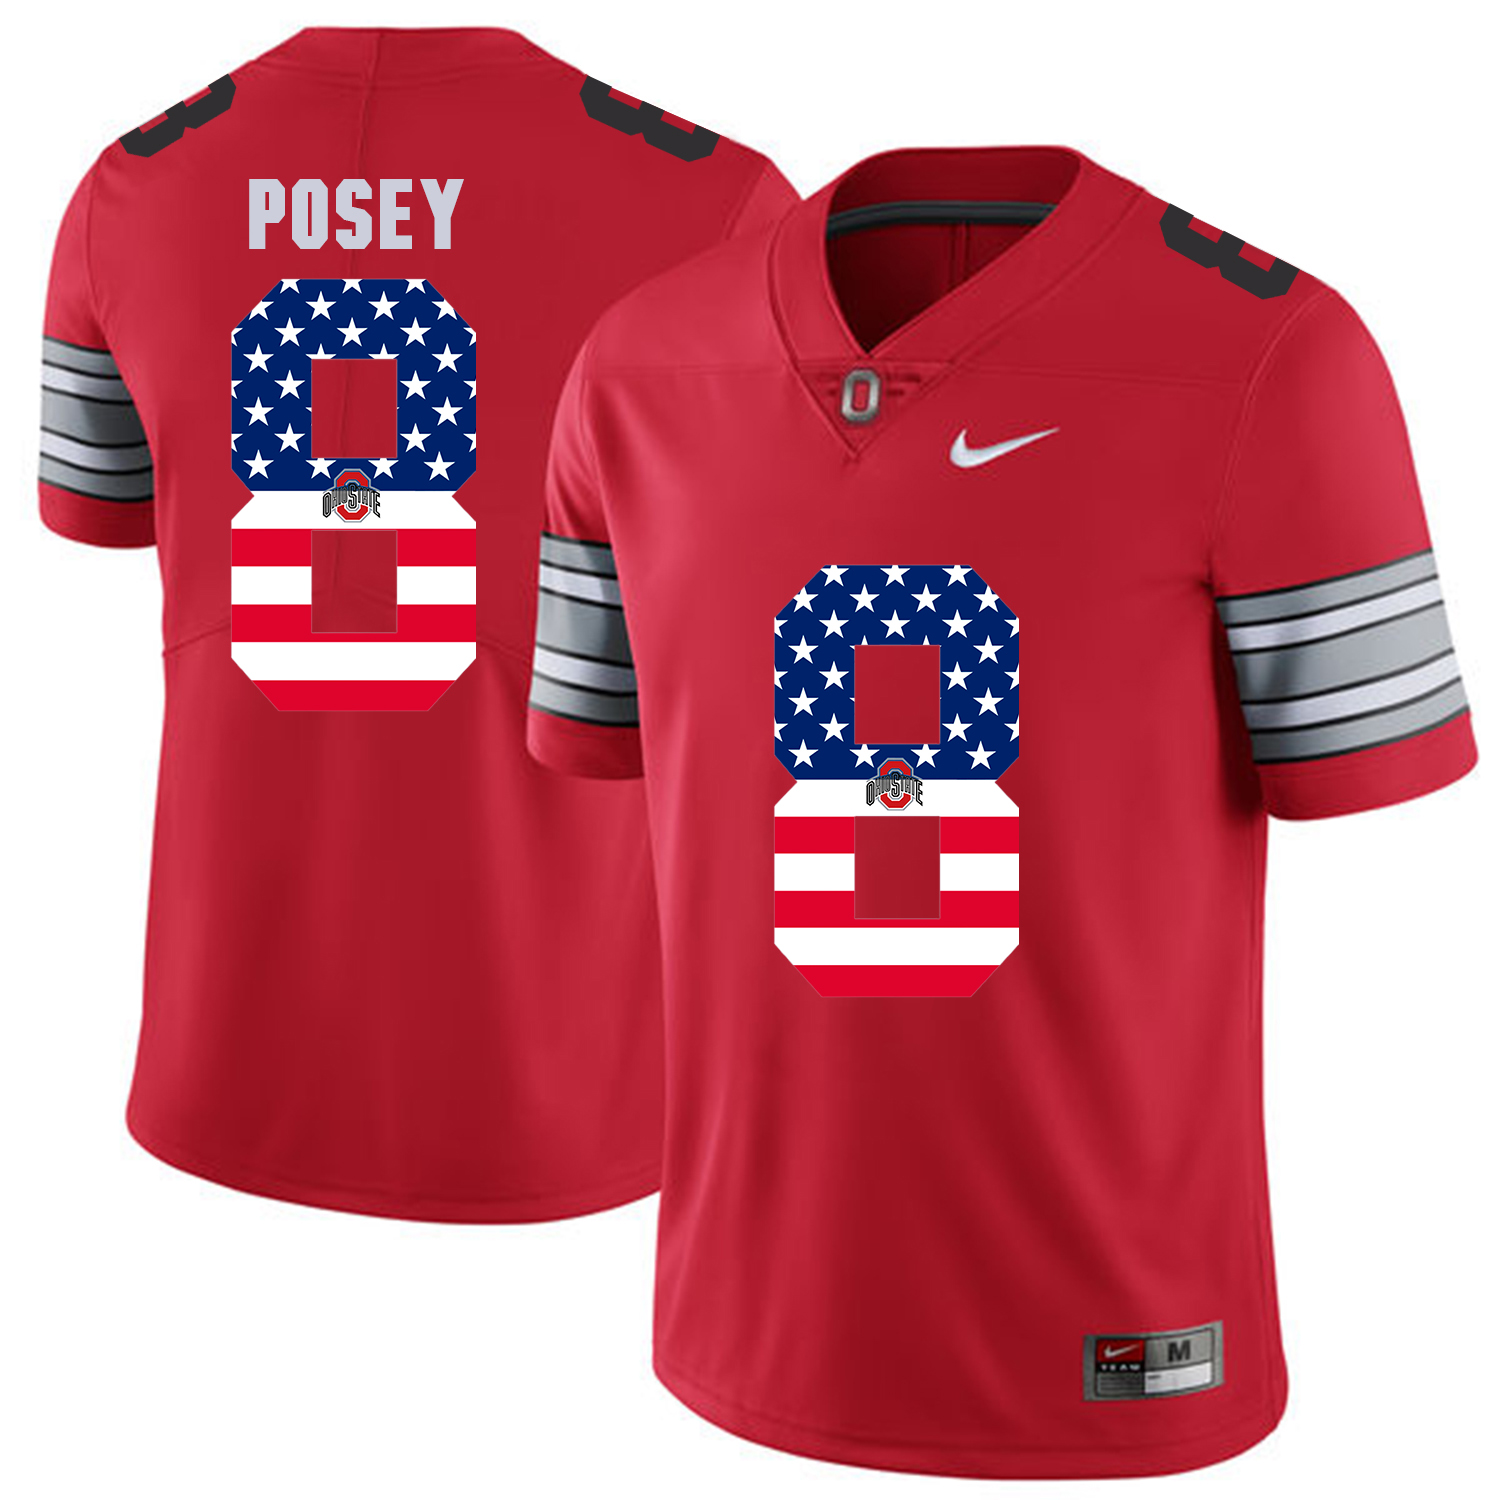 Men Ohio State 8 Posey Red Flag Customized NCAA Jerseys